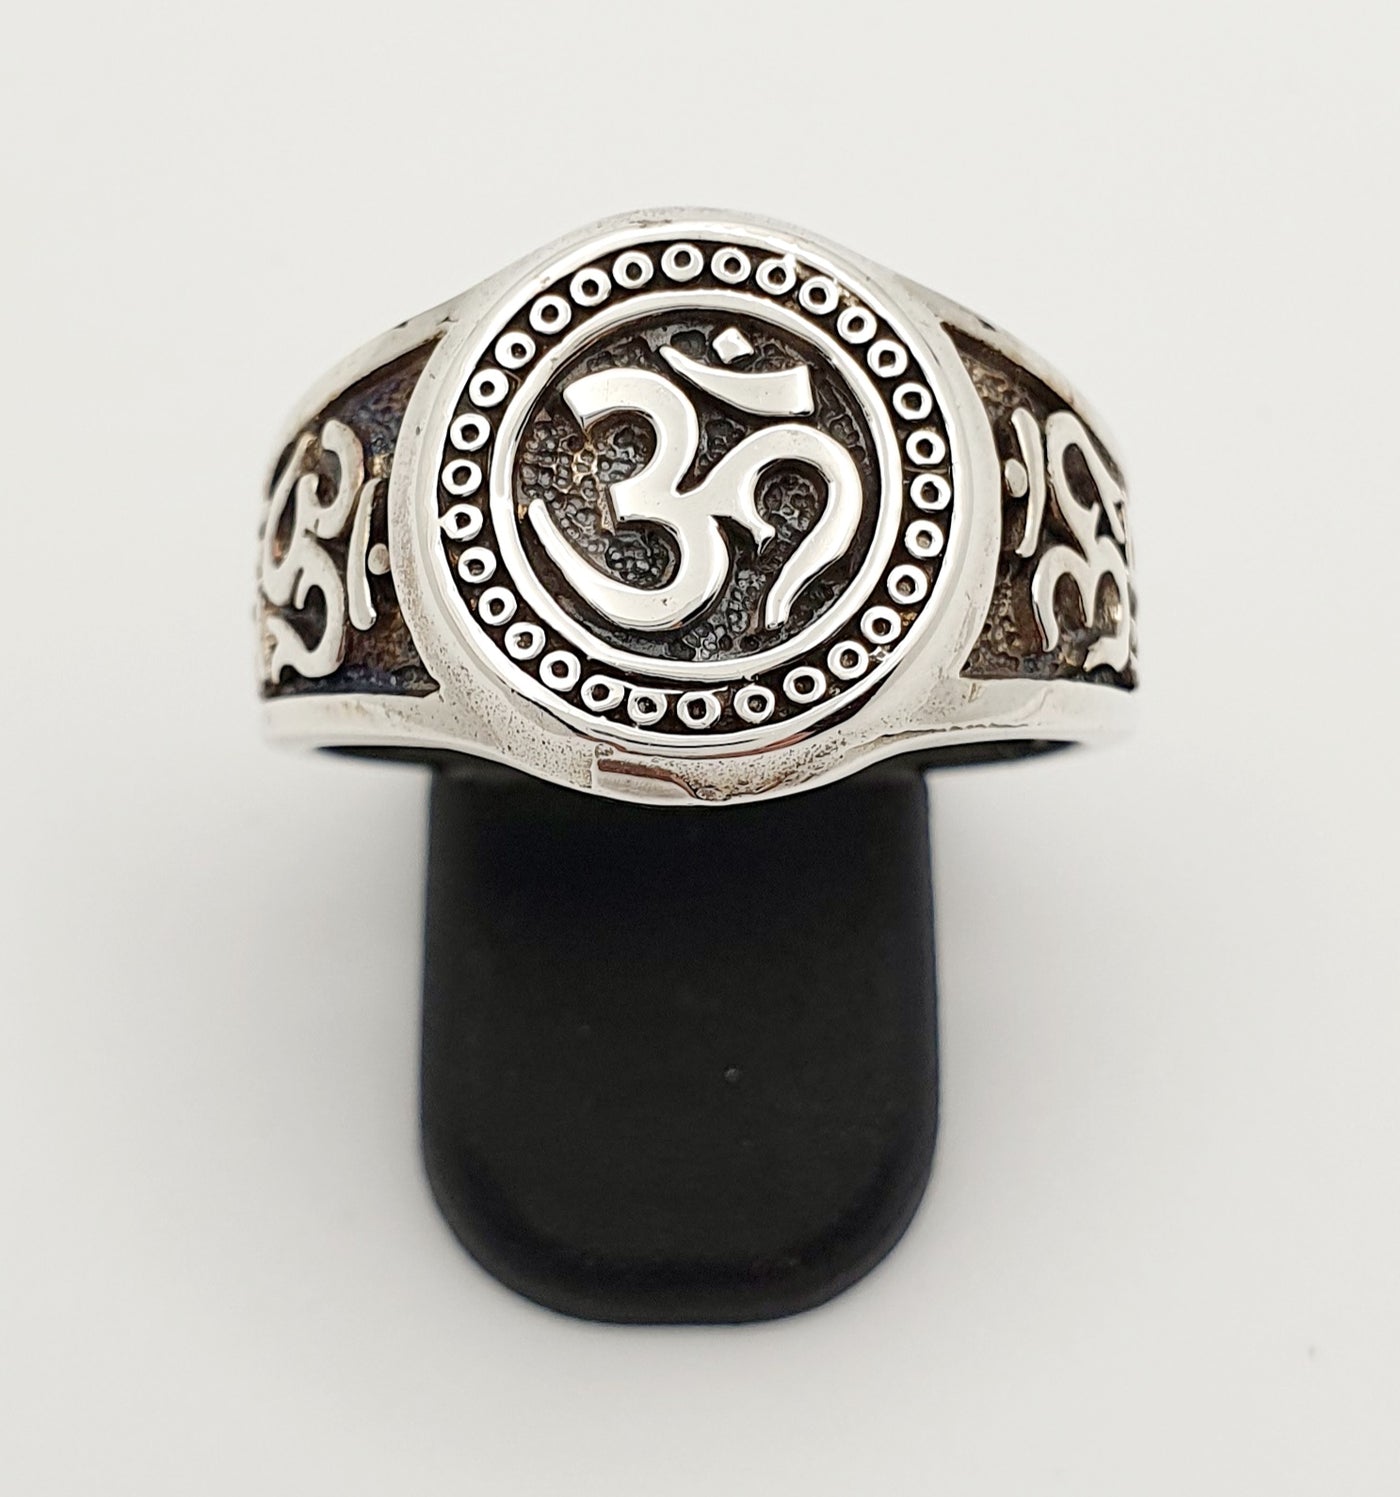 S/S Gents "Ohm" Ring, Size X 1/2